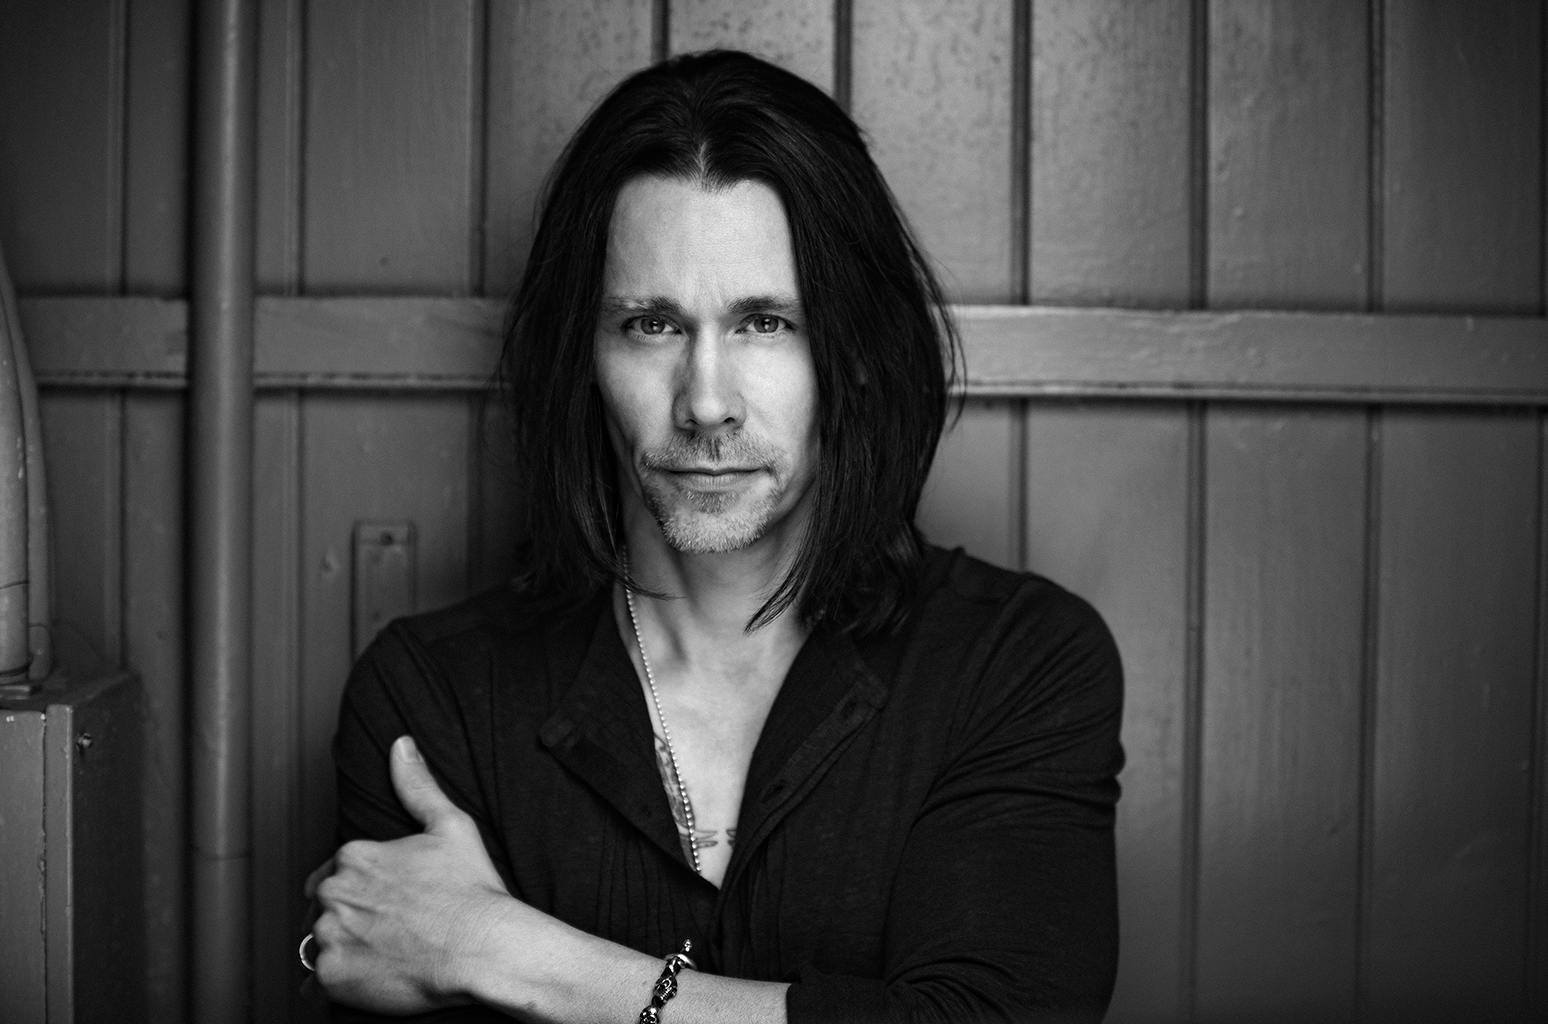 6 Things You Probably Didn't Know About Myles Kennedy